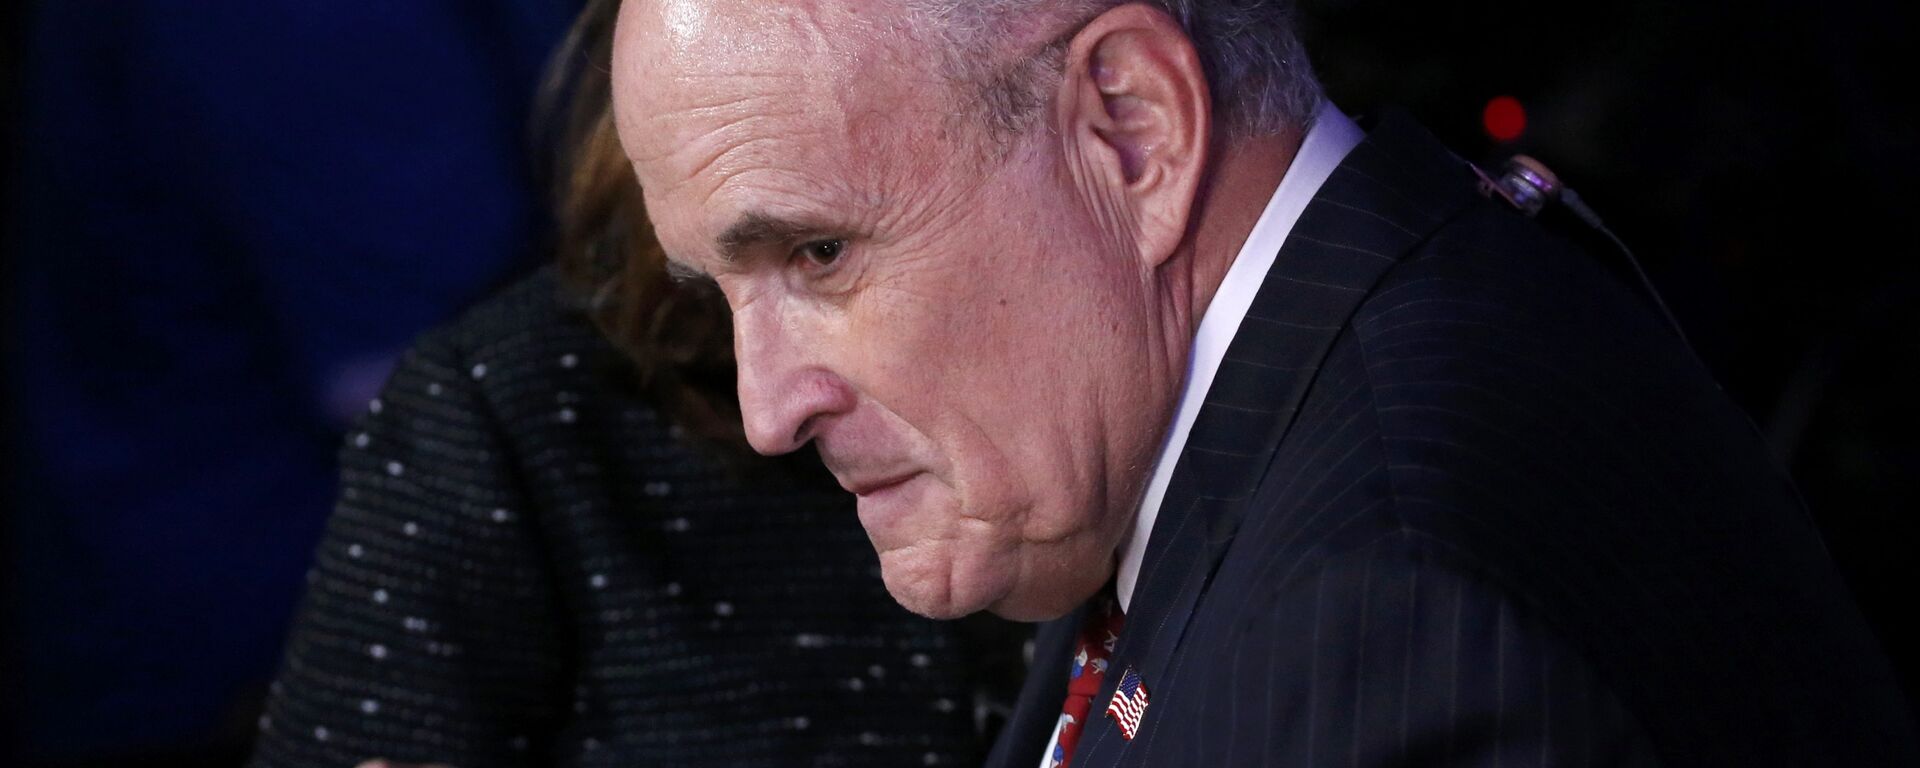 Former New York City Mayor Rudy Giuliani finishes a television interview at Republican U.S. presidential nominee Donald Trump's election night rally in Manhattan, New York, U.S., November 8, 2016 - Sputnik International, 1920, 21.10.2020